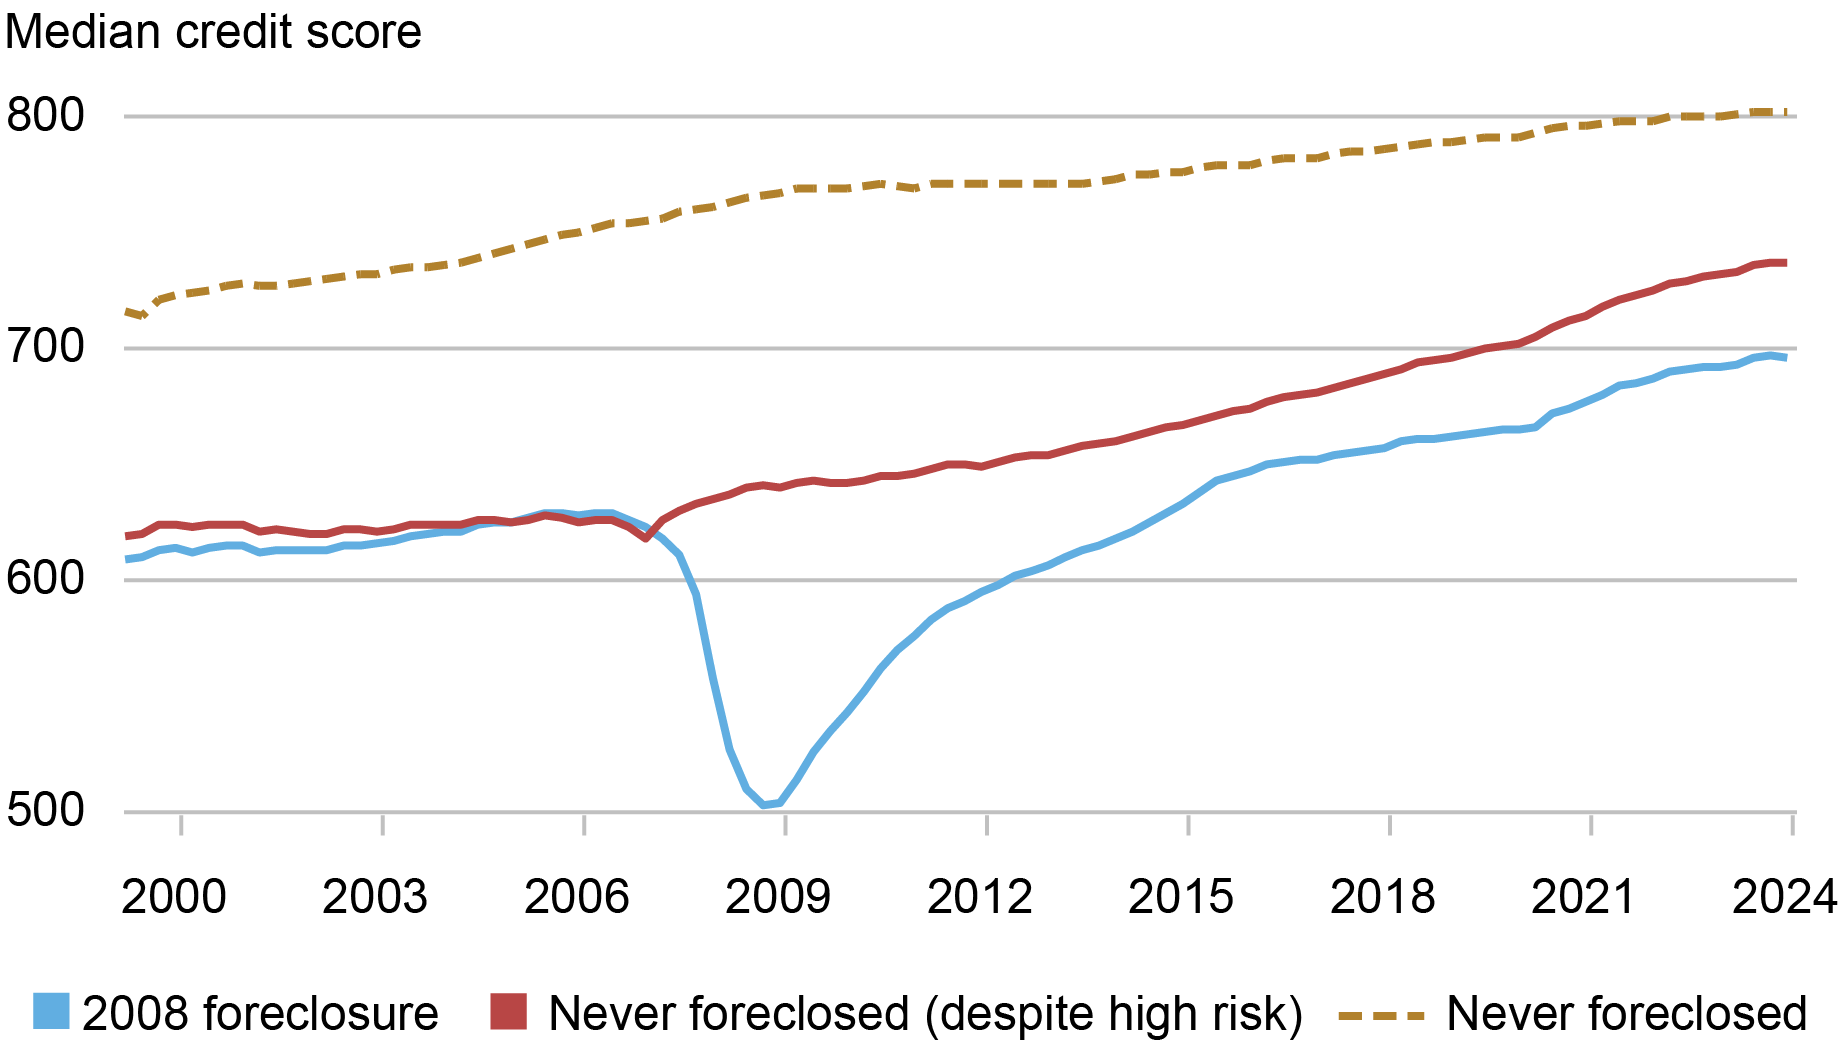 Alt=”line chart showing the mean credit scores of individuals with a 2008 foreclosure (blue), those who never foreclosed despite high risk (red), and those who never foreclosed (gold dotted), from 2000 through 2024” 